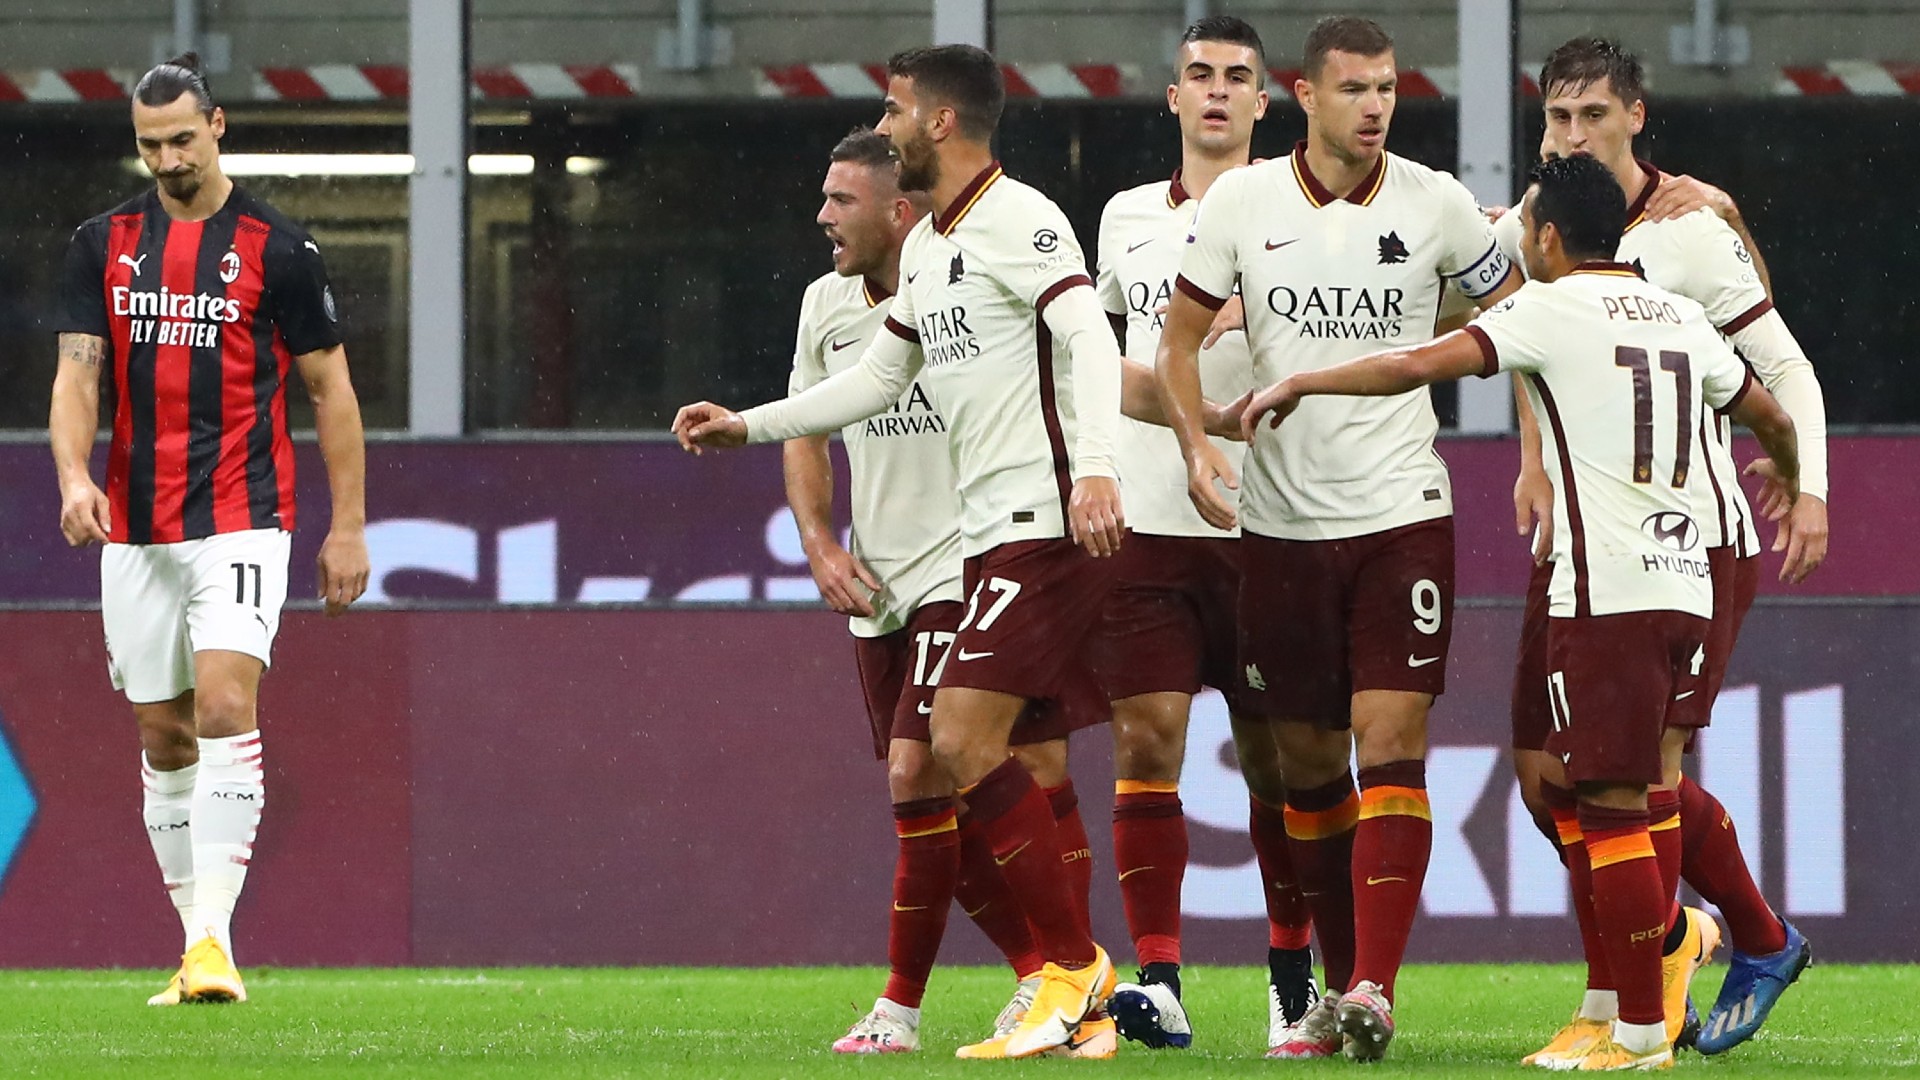 roma-milan-scommesse-sportive-online-serie-a-2021-Betaland-TheClover